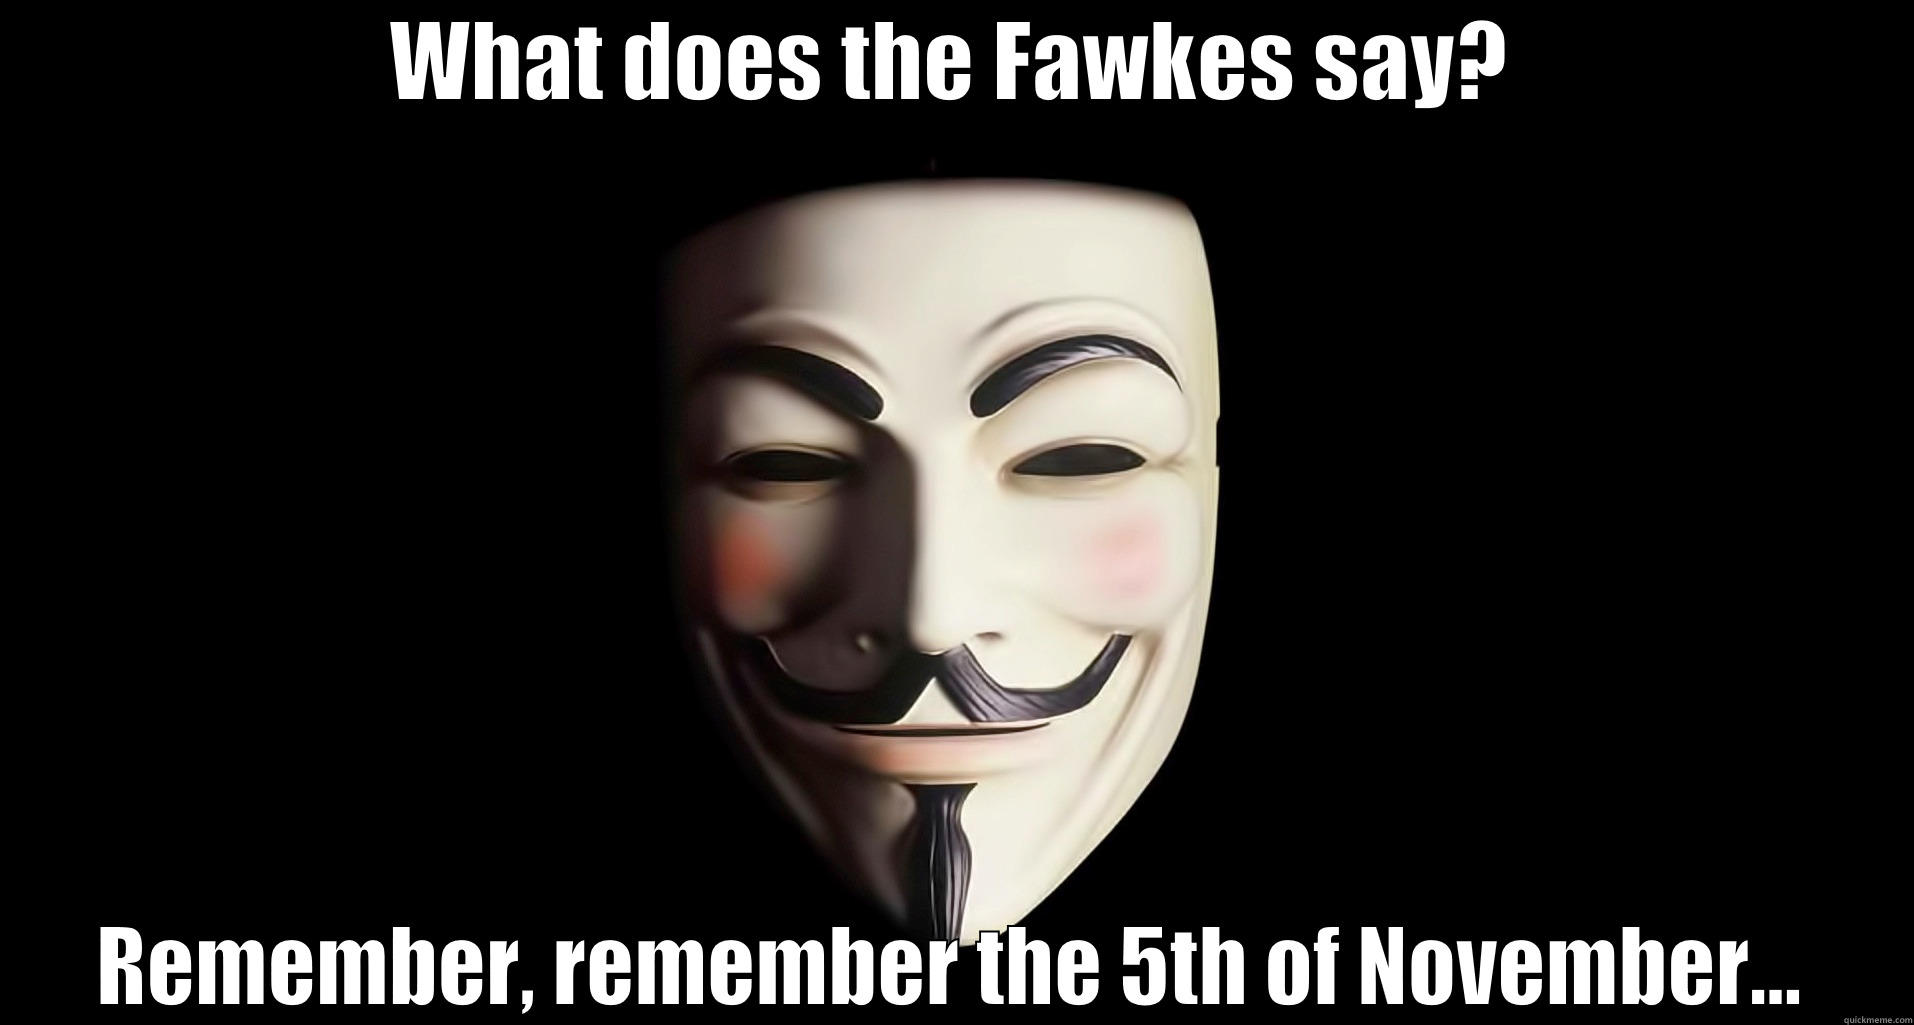 WHAT DOES THE FAWKES SAY? REMEMBER, REMEMBER THE 5TH OF NOVEMBER... Misc